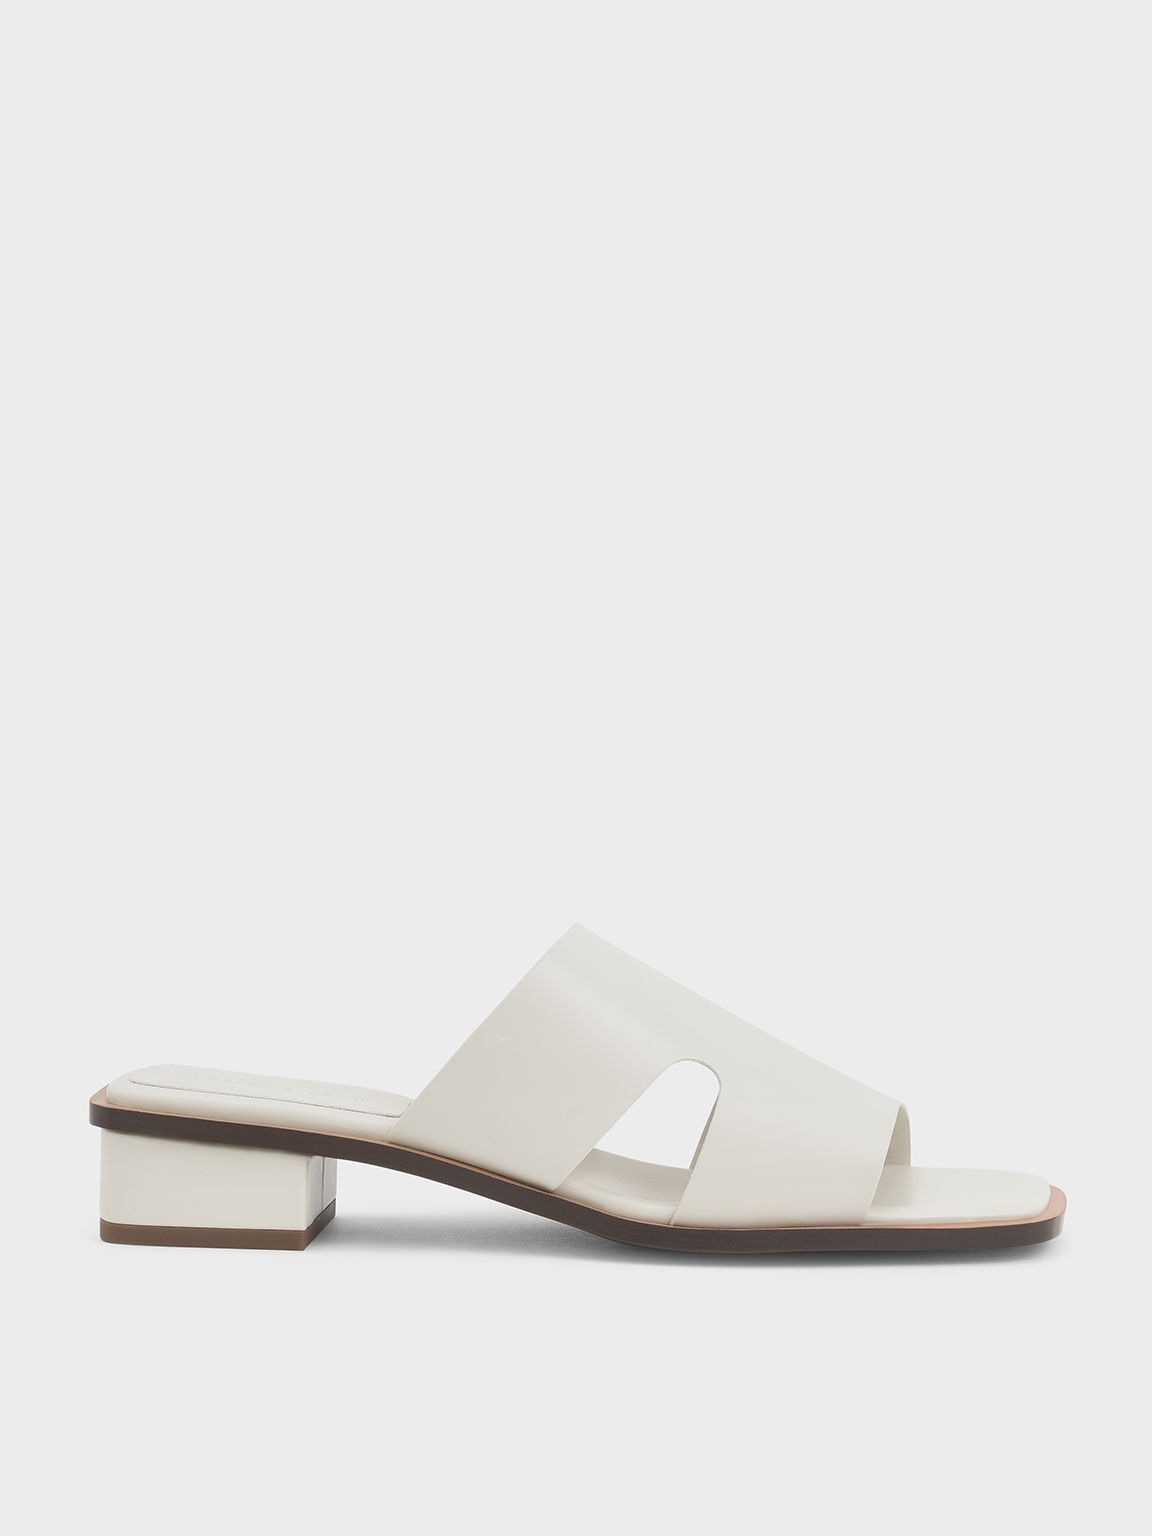 Cut-Out Mules, White, hi-res